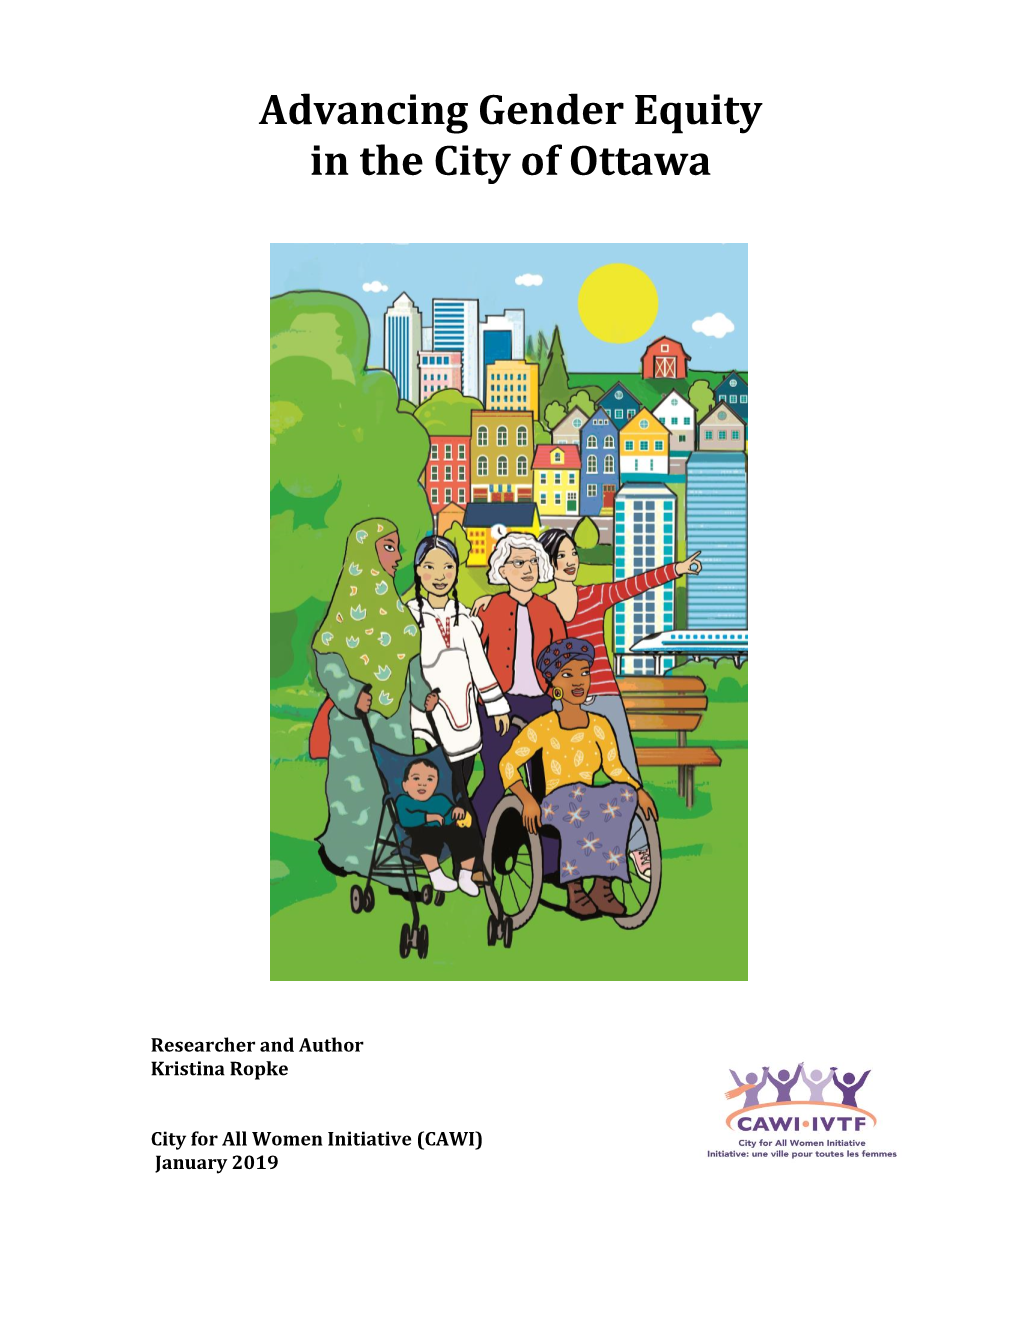 Advancing Gender Equity in the City of Ottawa